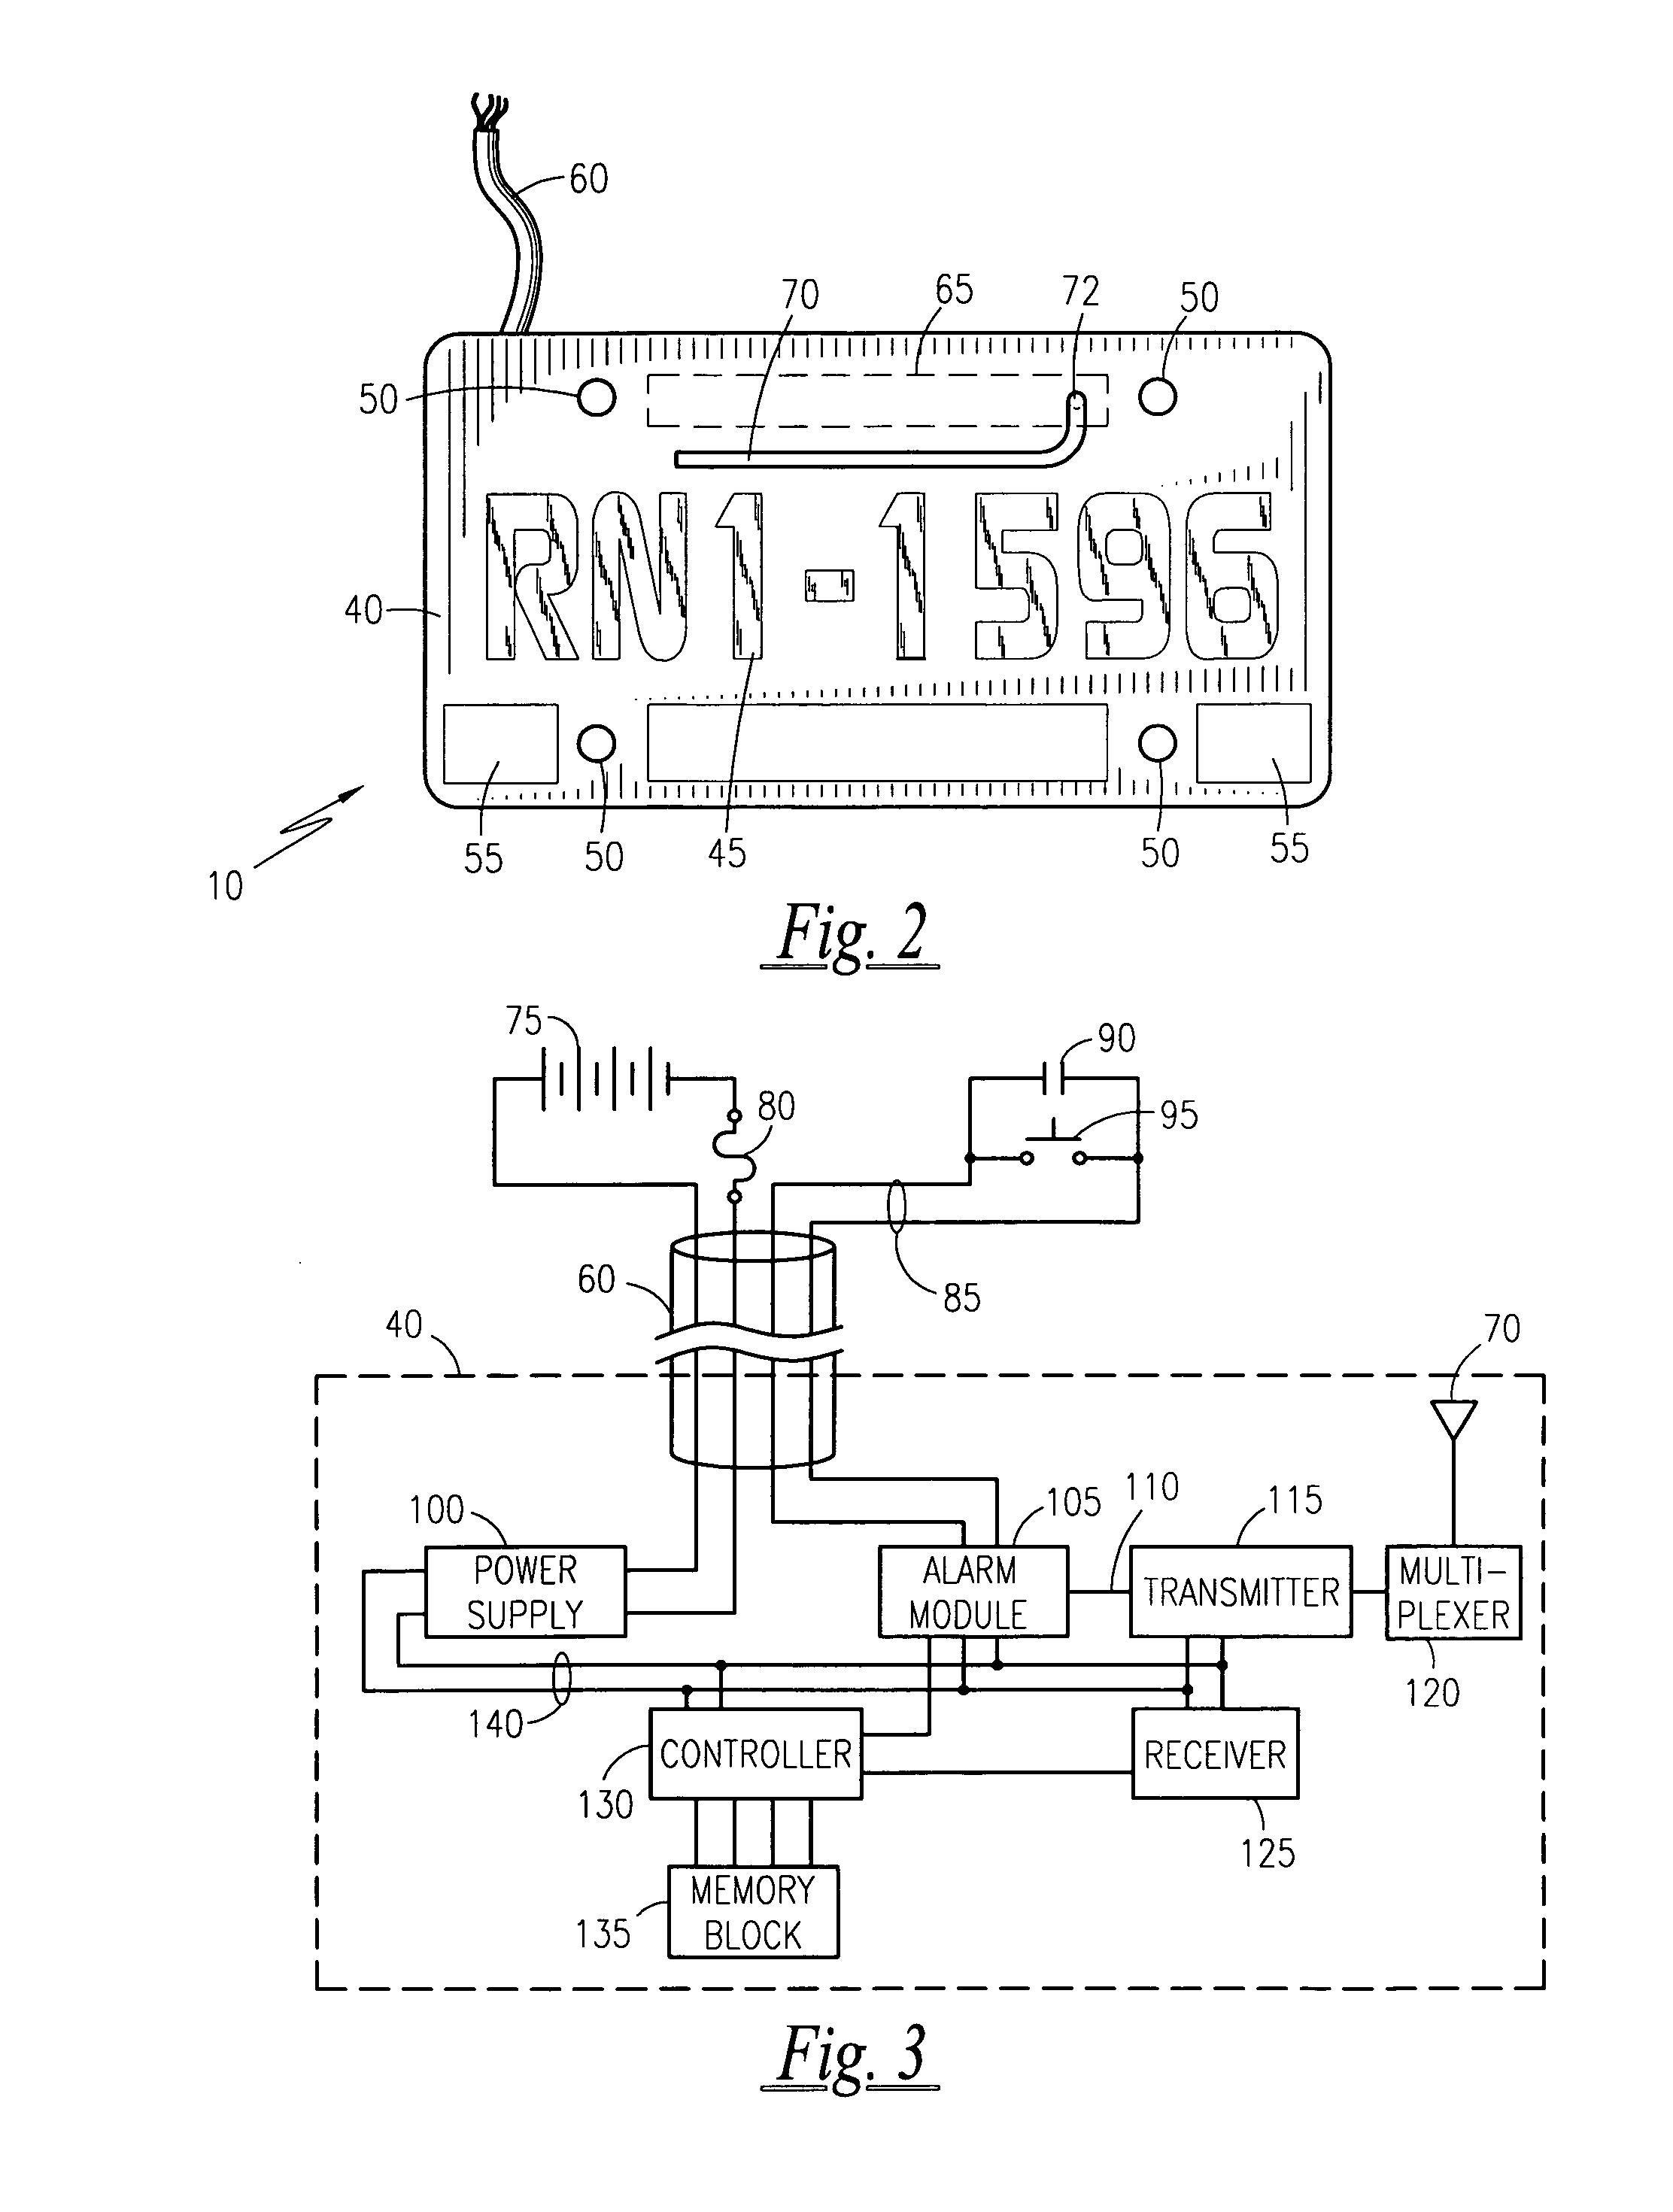 Motor vehicle license plate with integral wireless tracking and data dissemination device